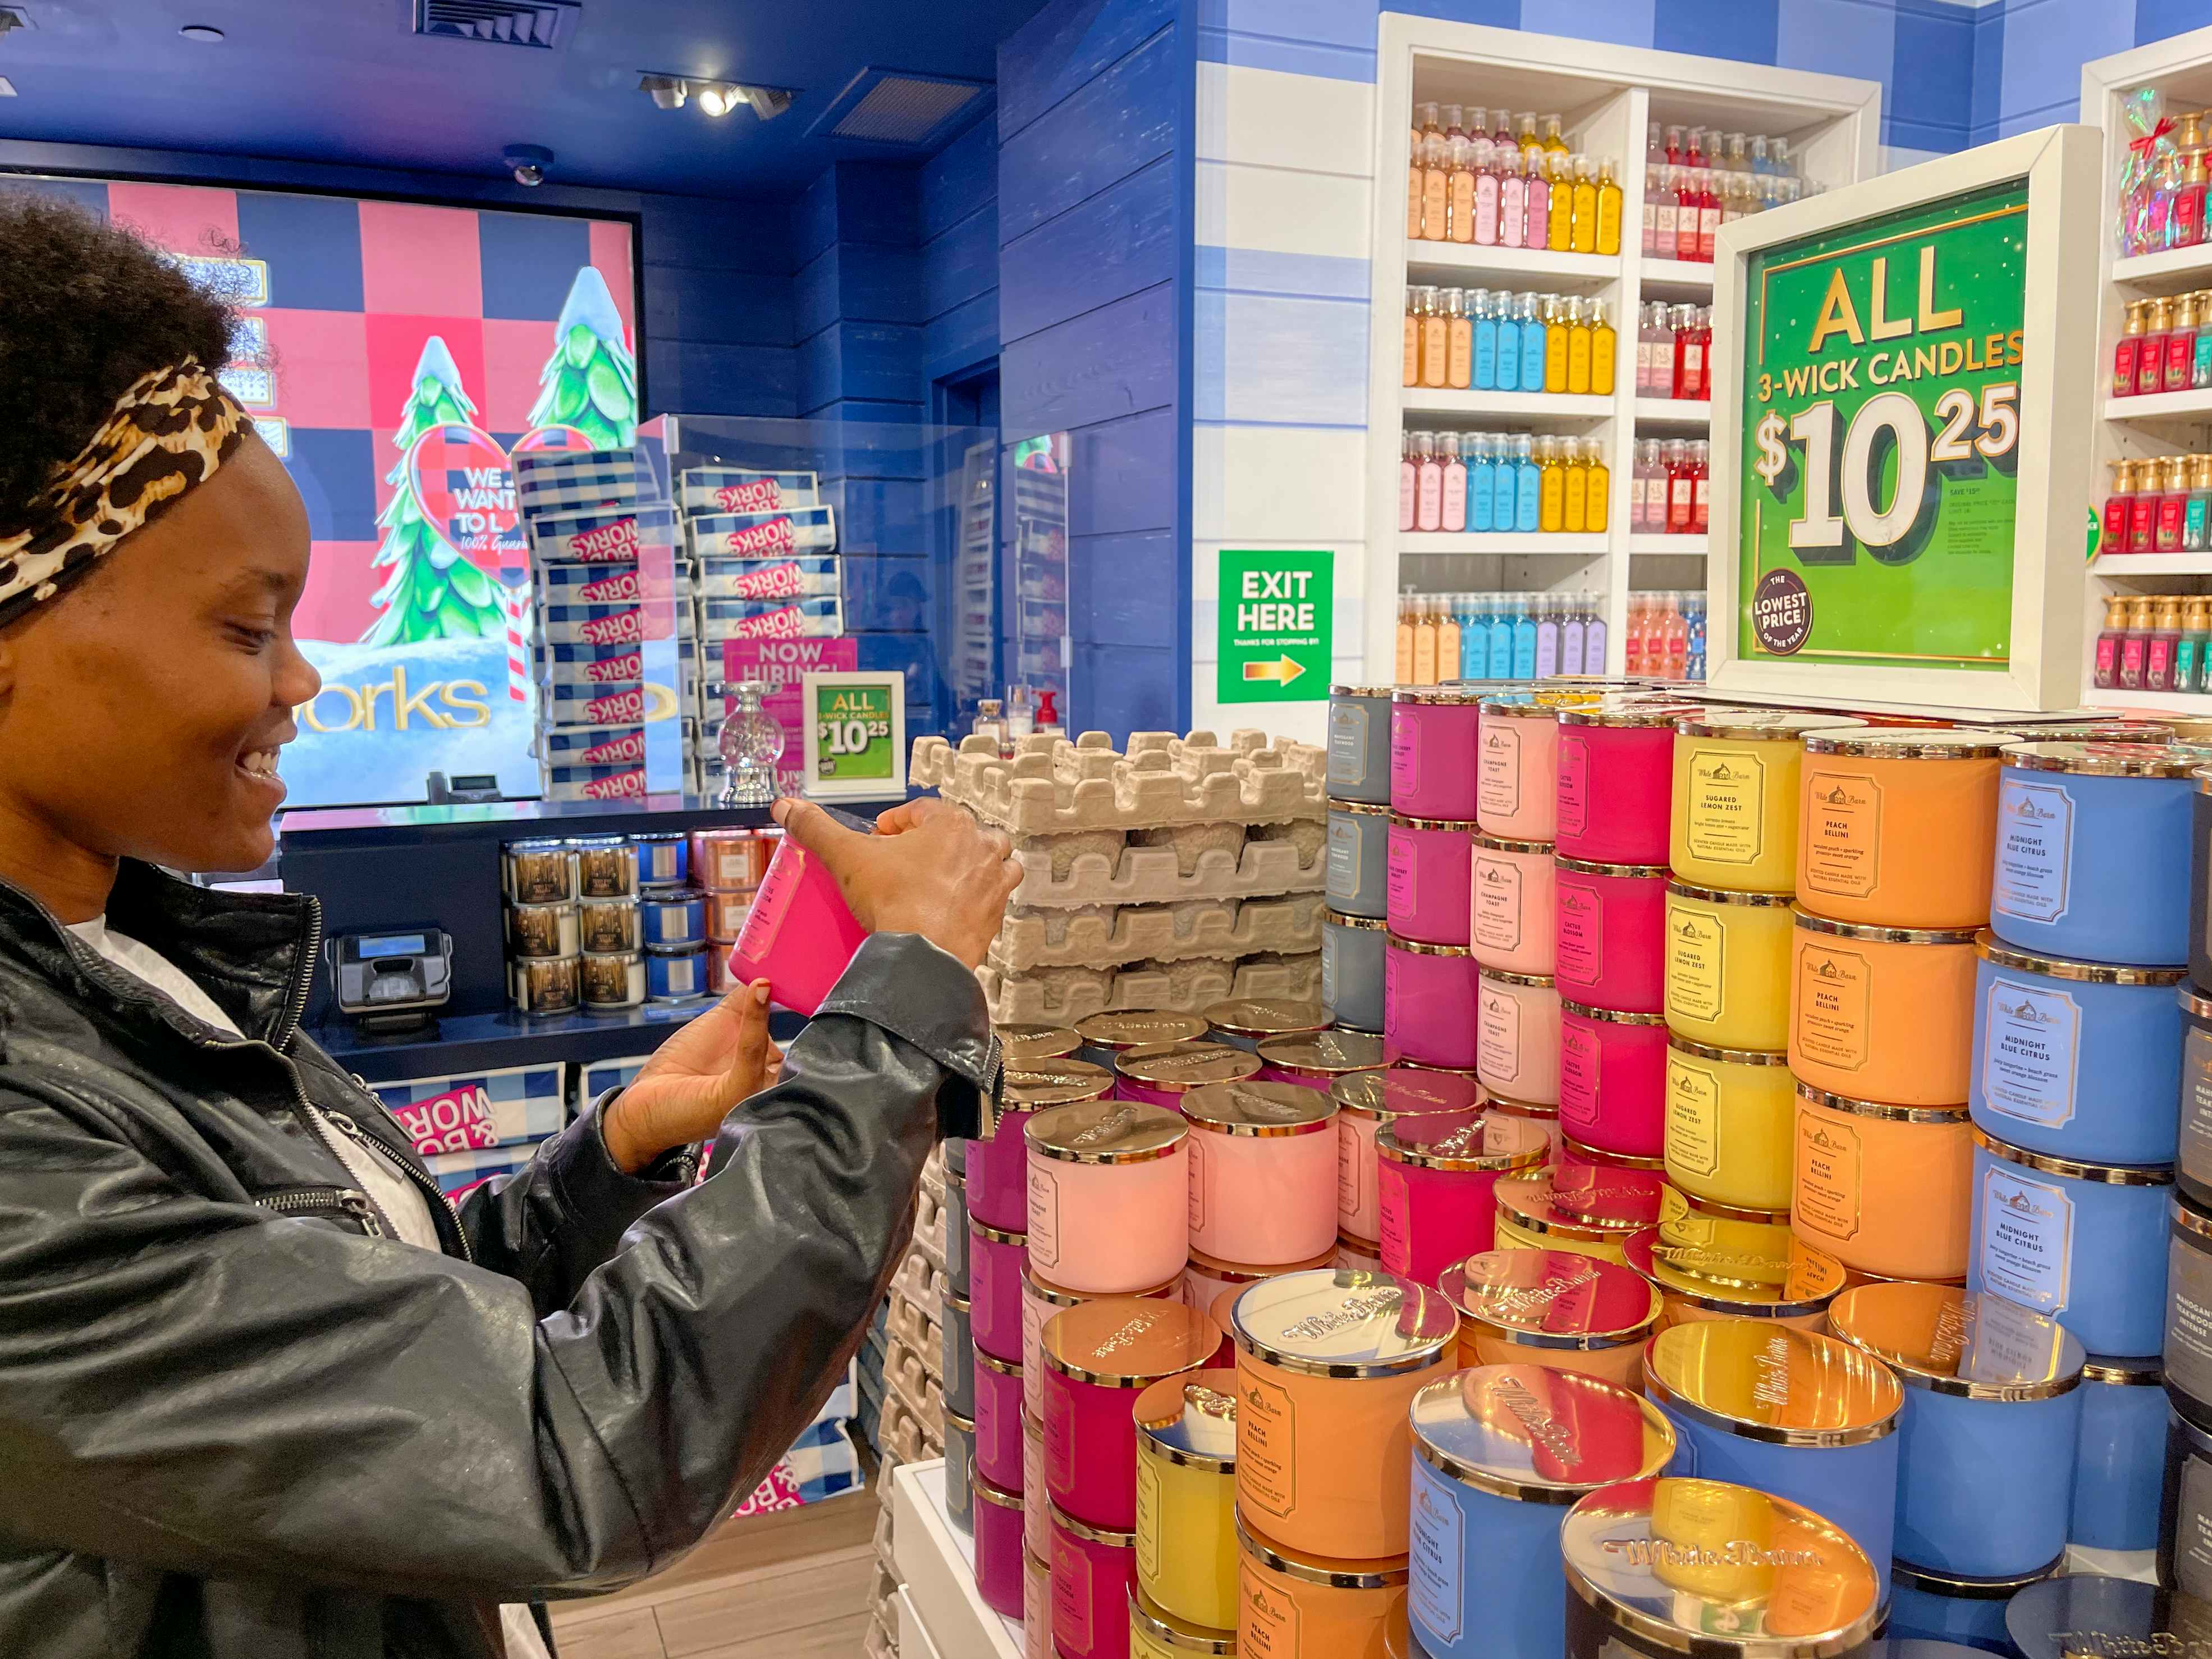 Bath & Body Works' Annual Candle Sale Is Now a 3-Day Event, So